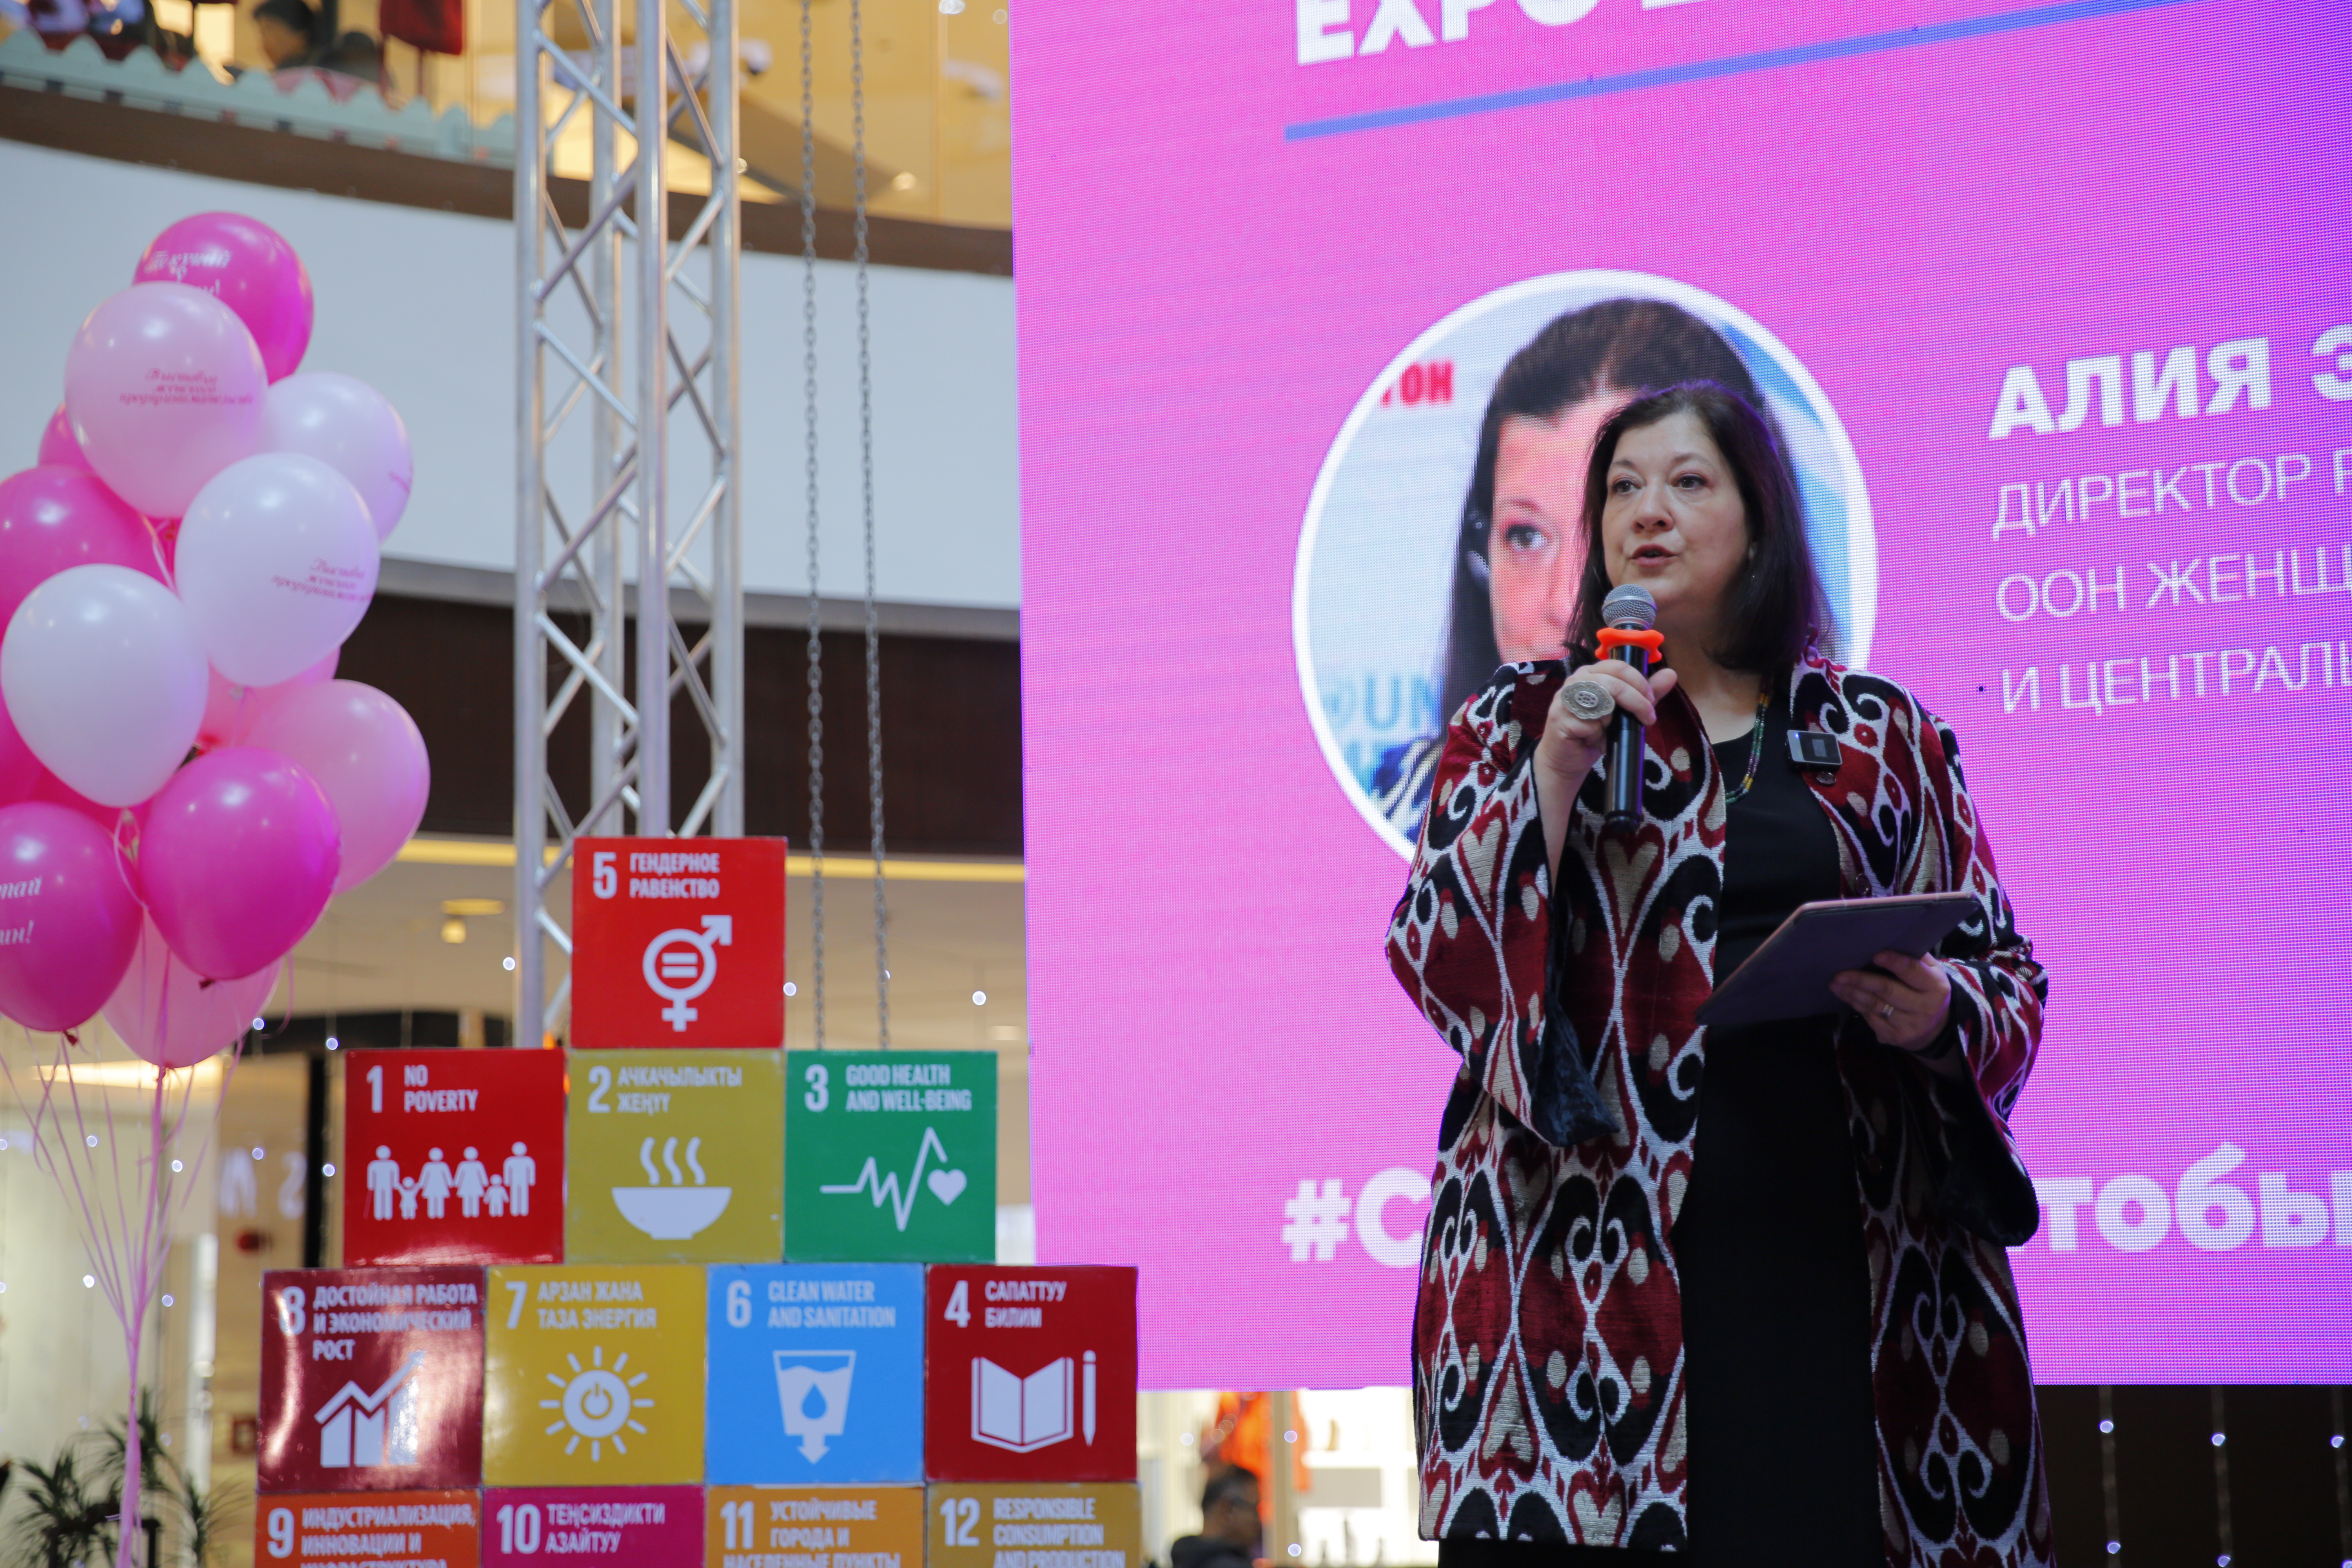 UN Women Regional Director for Europe and Central Asia, Alia El-Yassir, delivers opening remarks at the Women’s Entrepreneurship EXPO satellite event in Kyrgyzstan. Photo: UN Women.